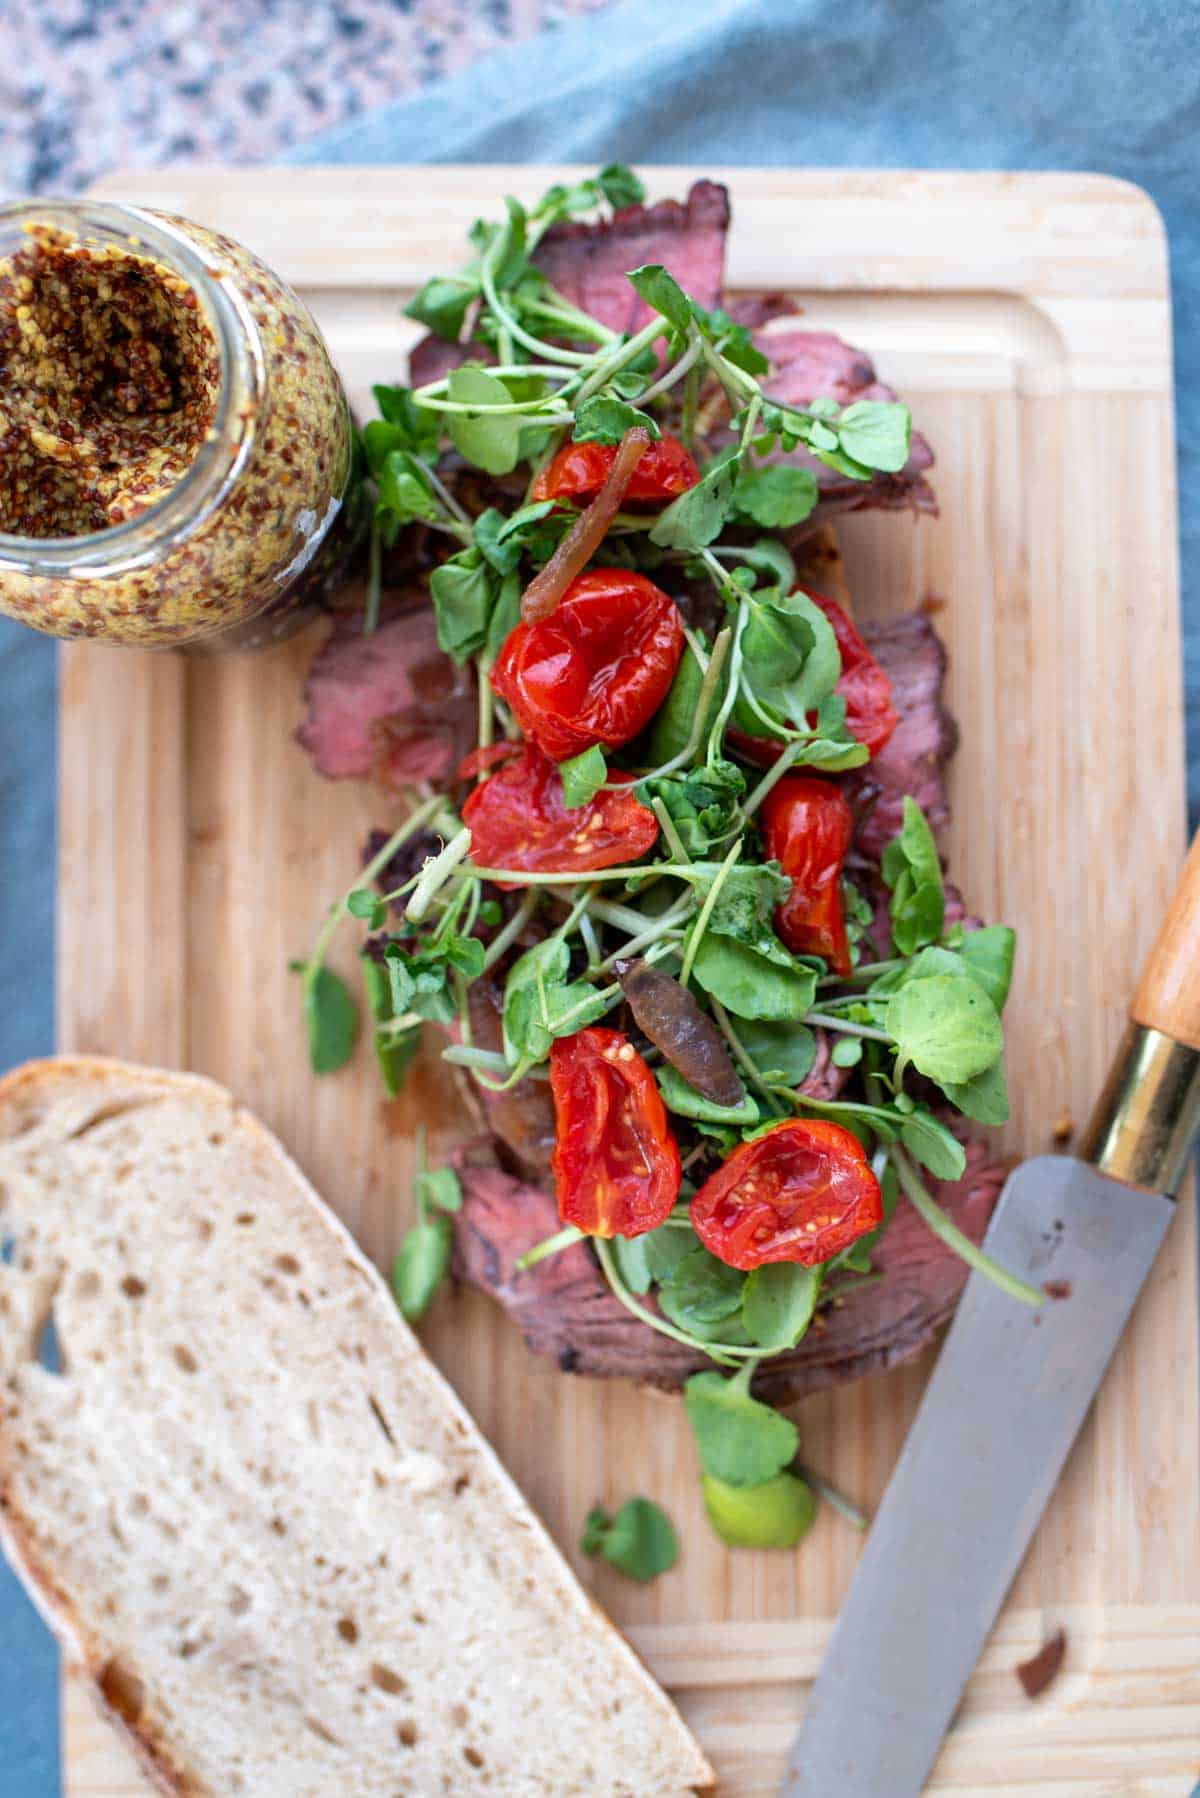 Open-faced roast beef sandwich with arugula and cherry tomatoes on a wooden cutting board.